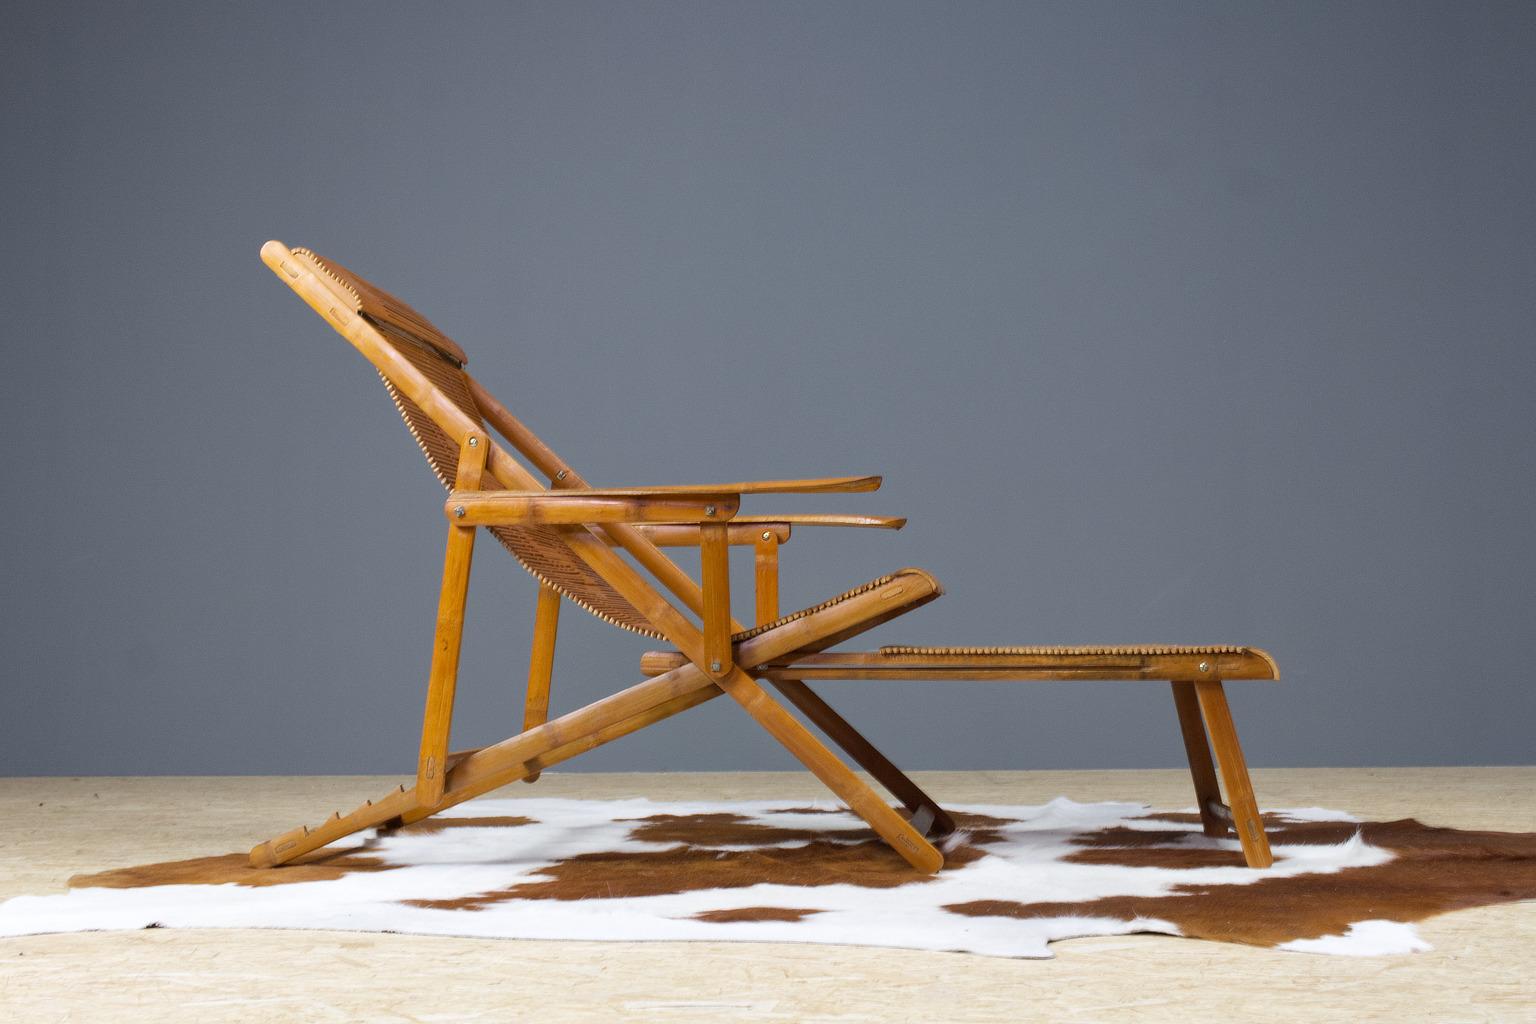 A Japanese vintage (1940s) bamboo deck chair with armrest and attached hocker. This handmade lounger is foldable, and has 4 positions. The hocker slides underneath the chair. Honey, warm brown colored bamboo. Incredible great piece of craftsmanship.